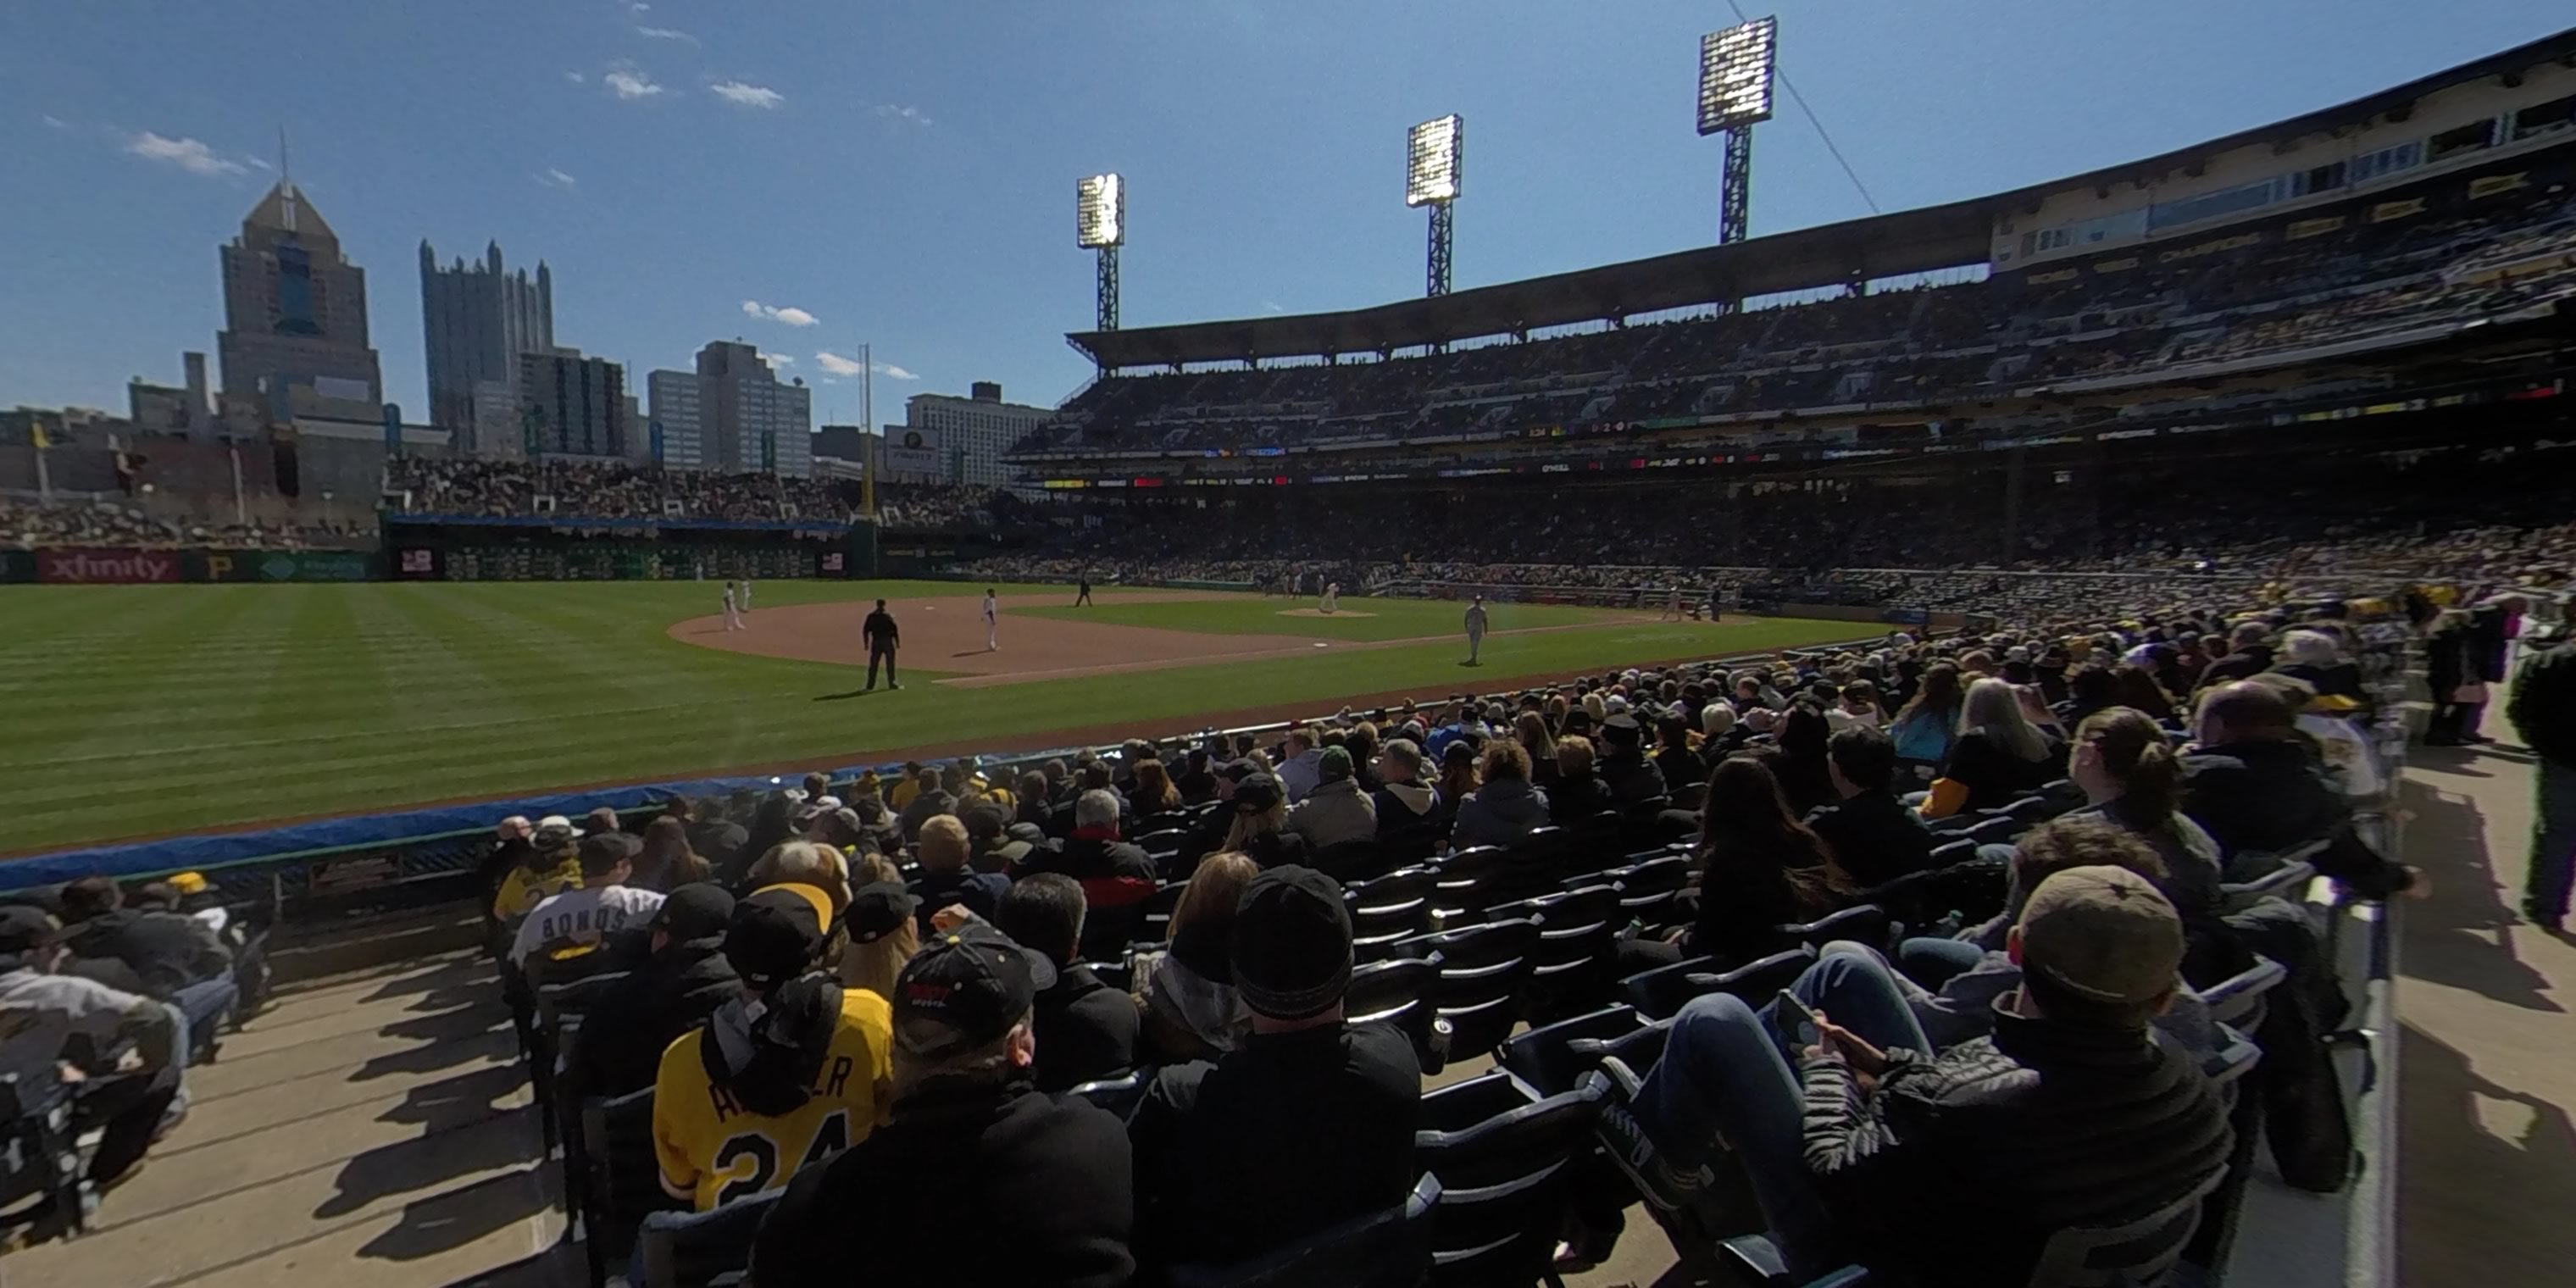 Our Review Of PNC Park